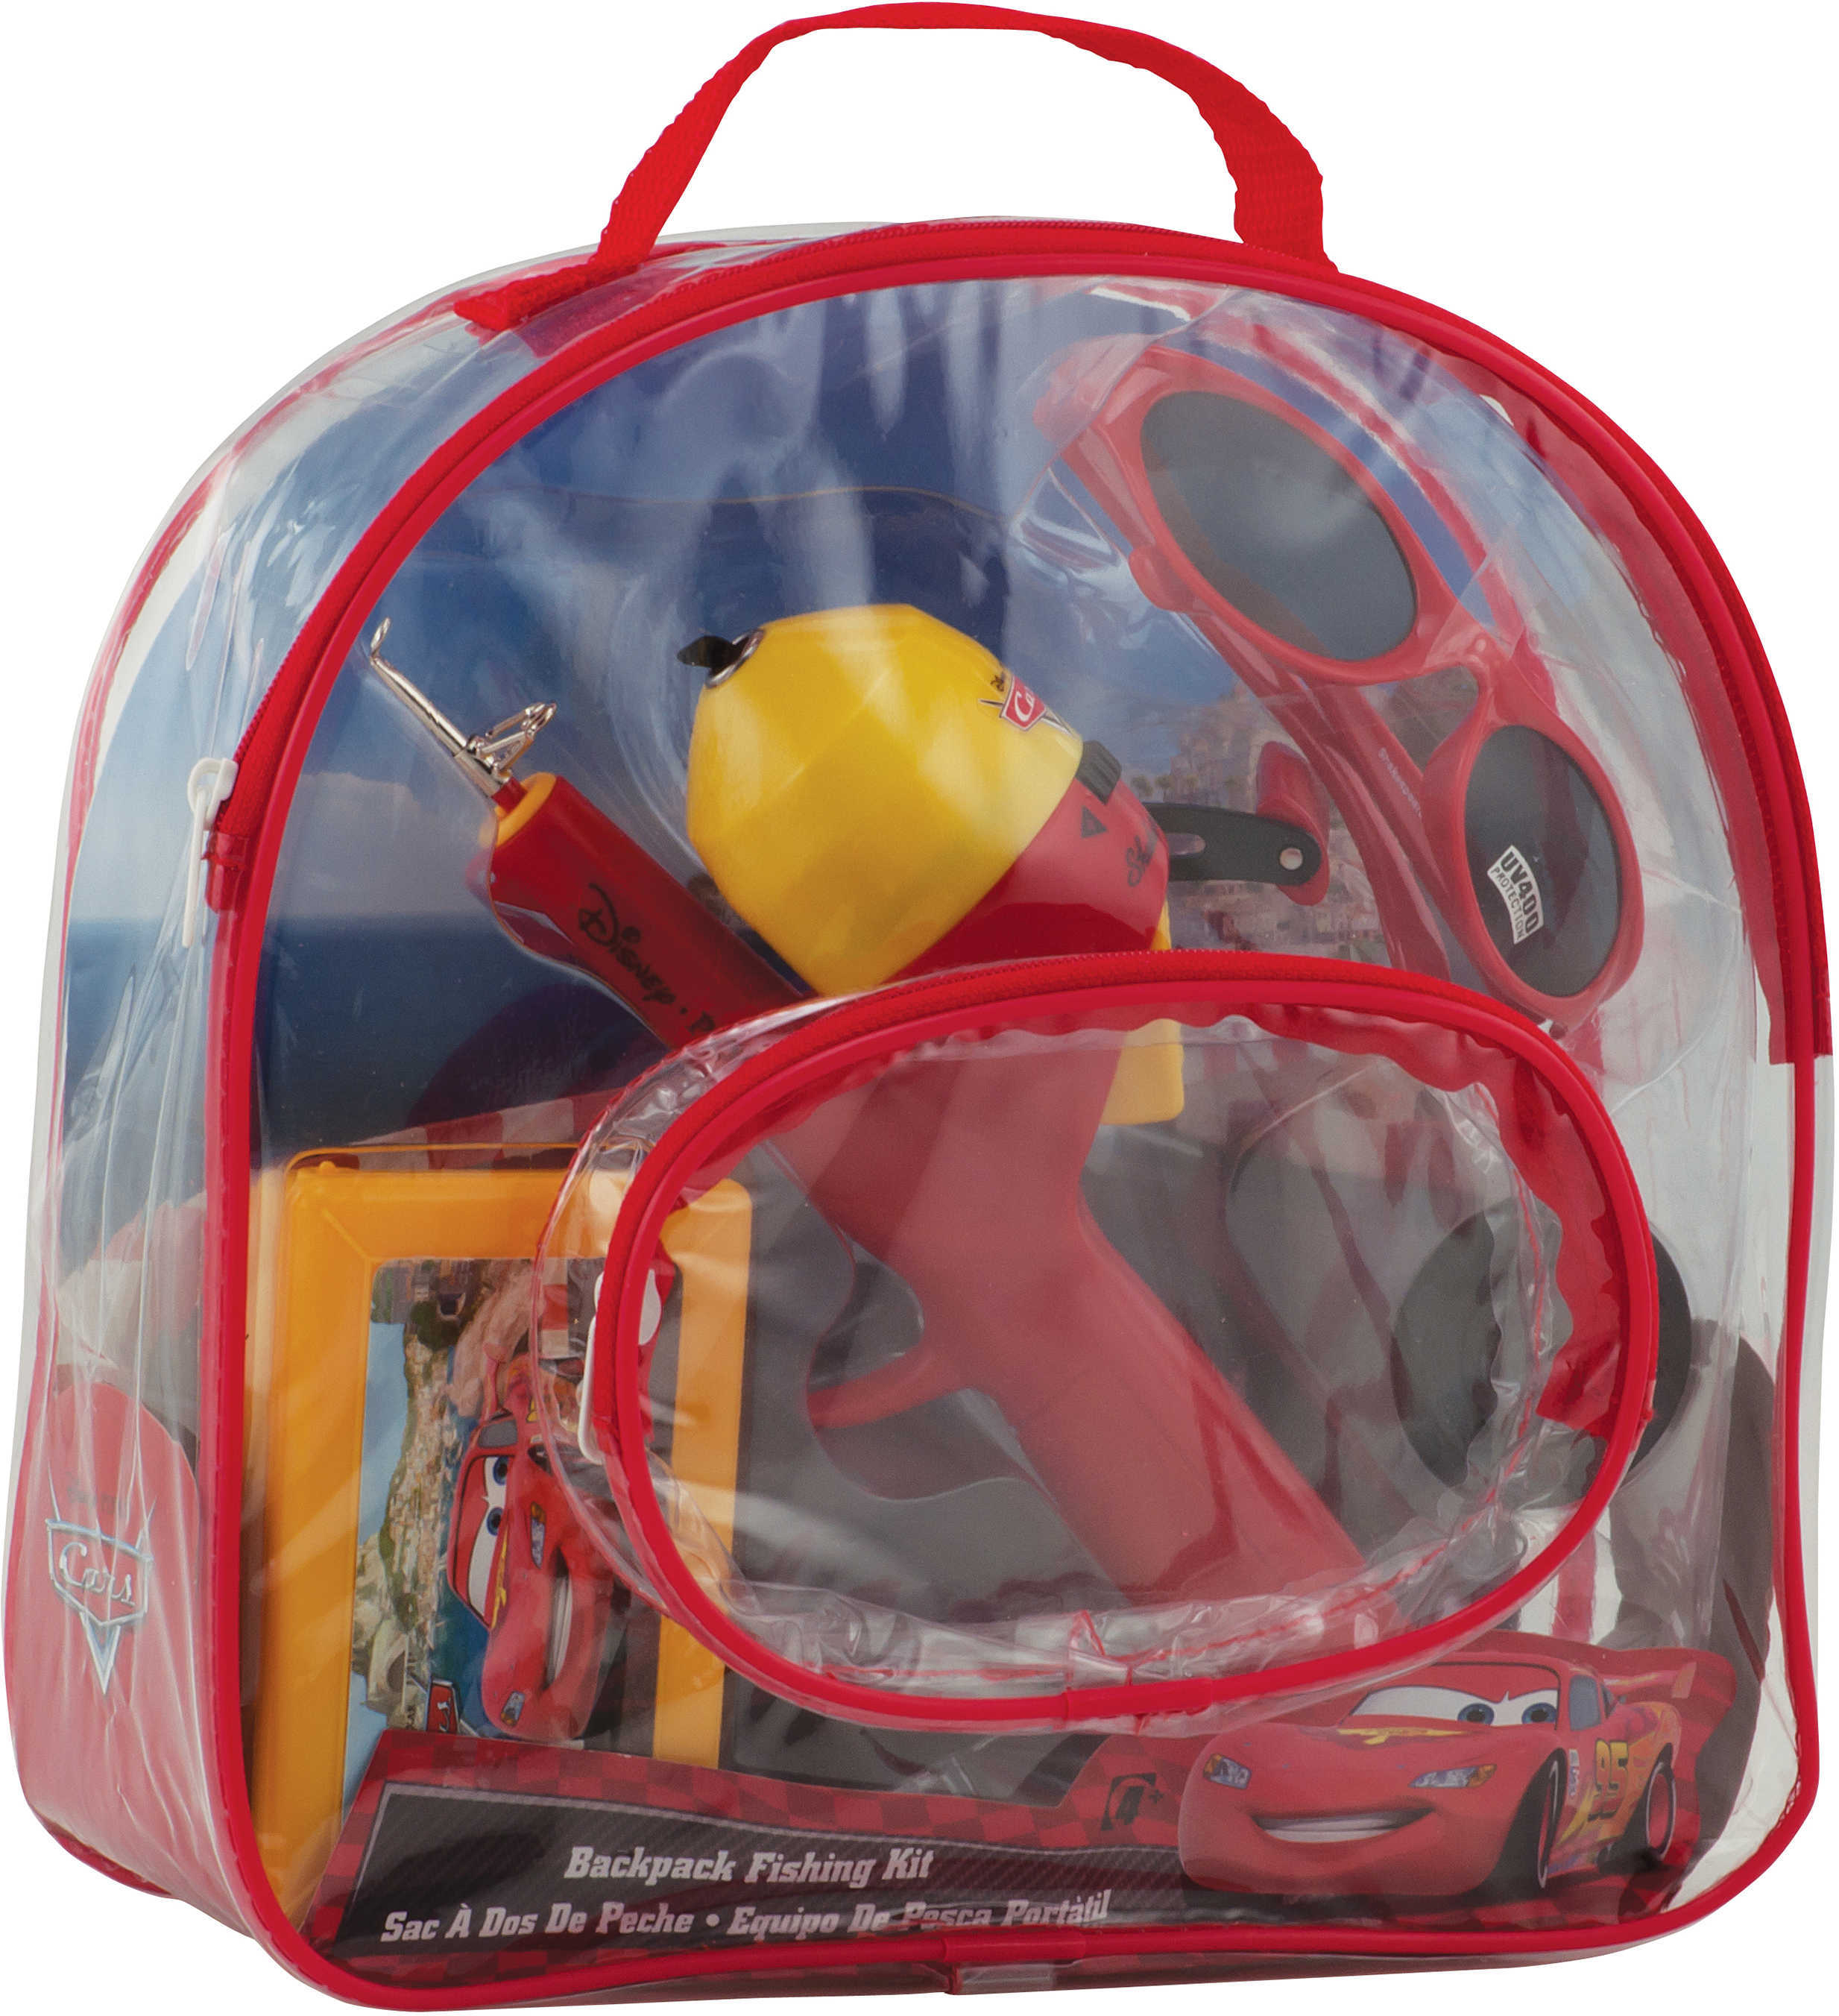 Shakespeare Youth Fishing Kits Disney Cars, Backpack Md: 1402991